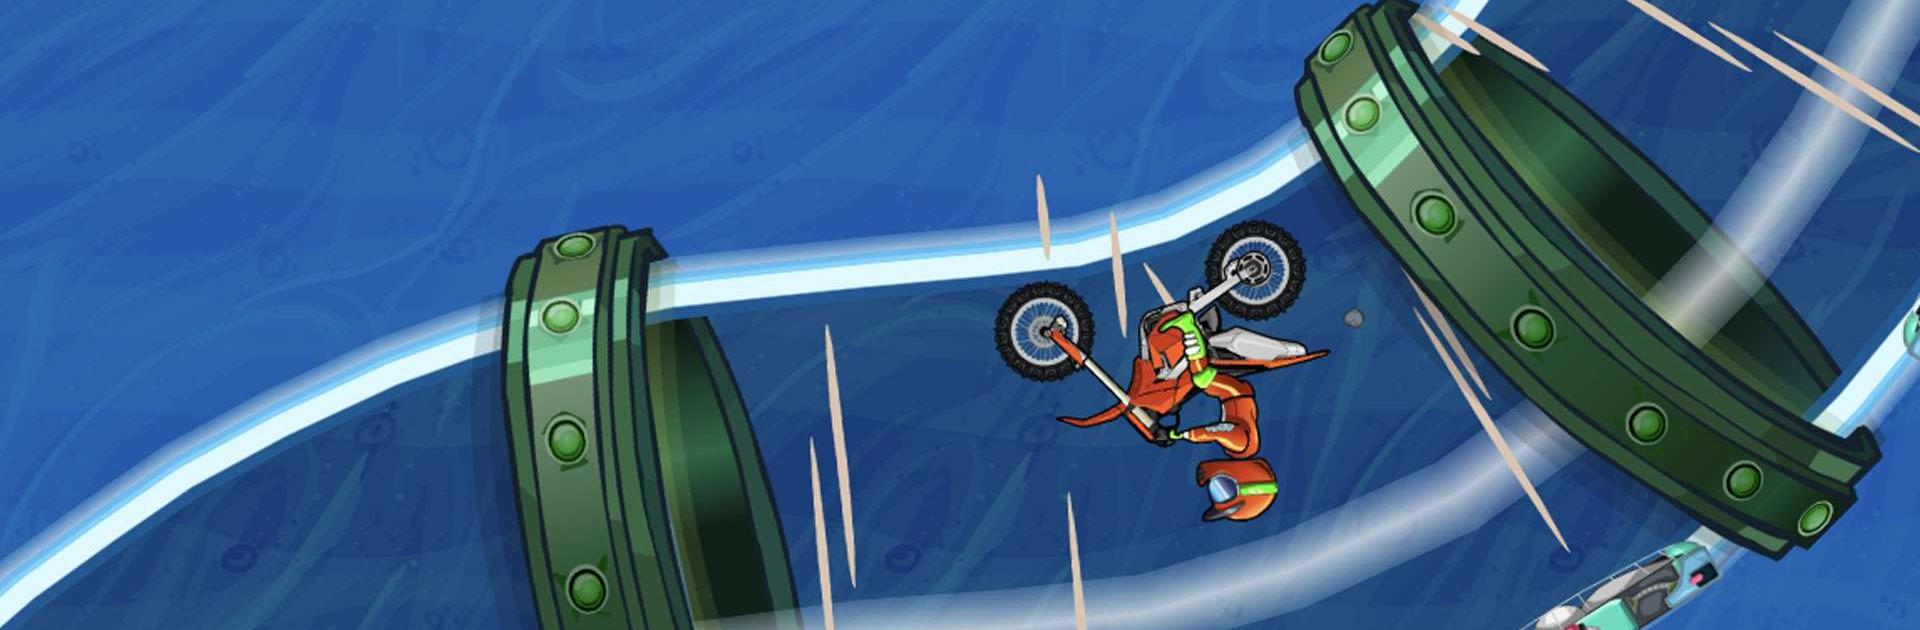 Play Moto X3M Bike Race Game Online for Free on PC & Mobile